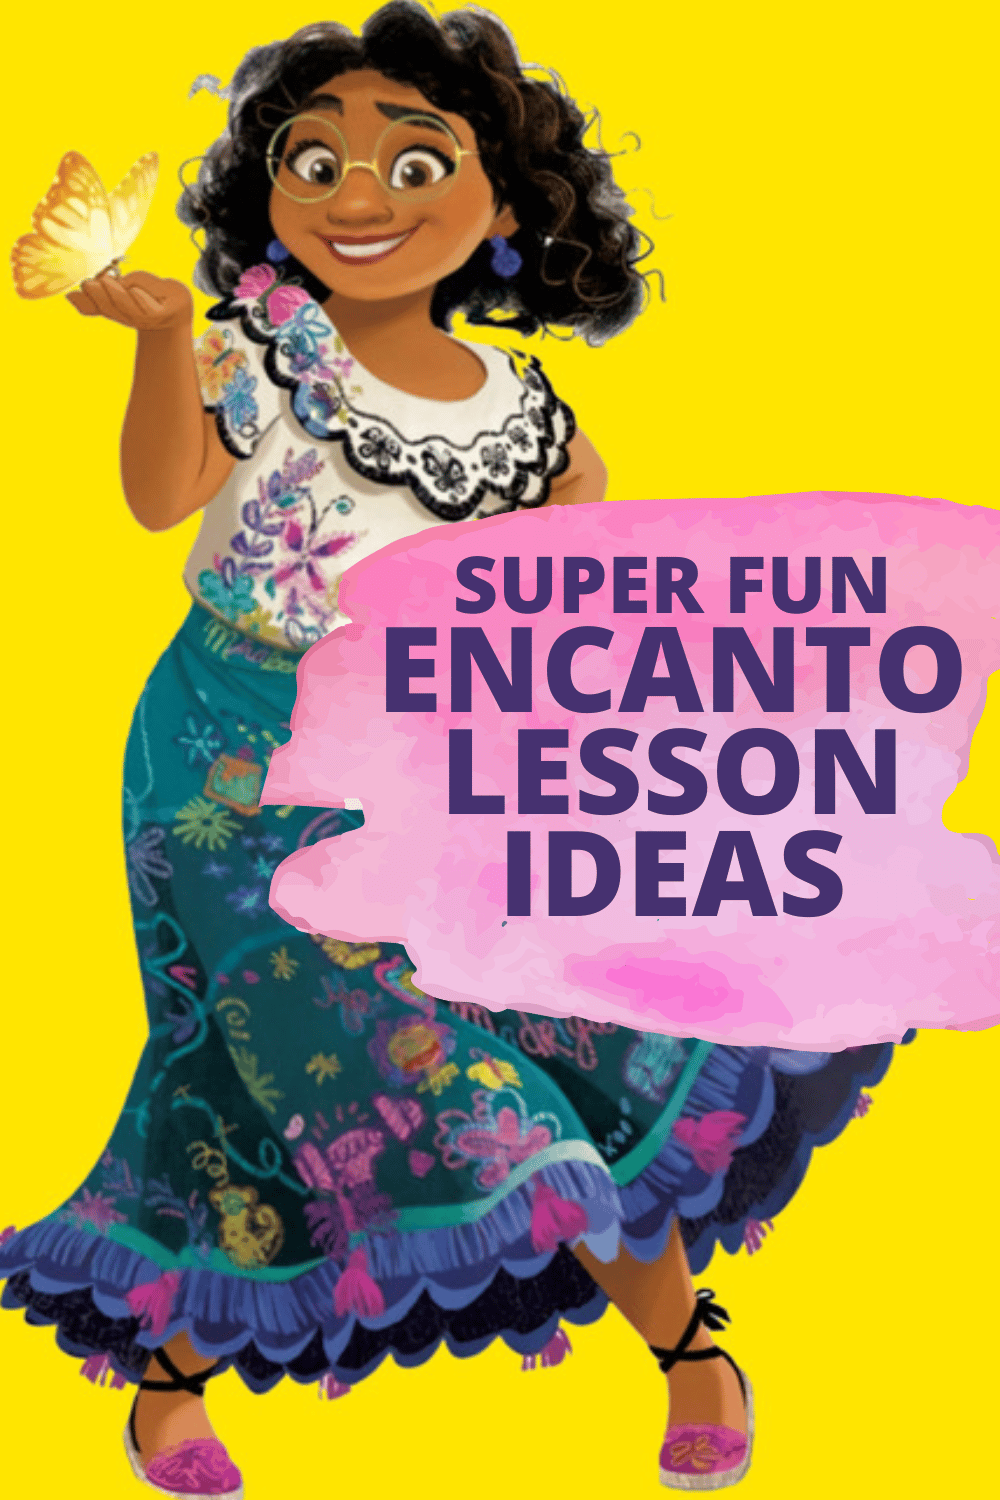 ENCANTO LESSON PLAN IDEAS cartoon character Mirabel from Encanto holding a butterfly on a yellow background